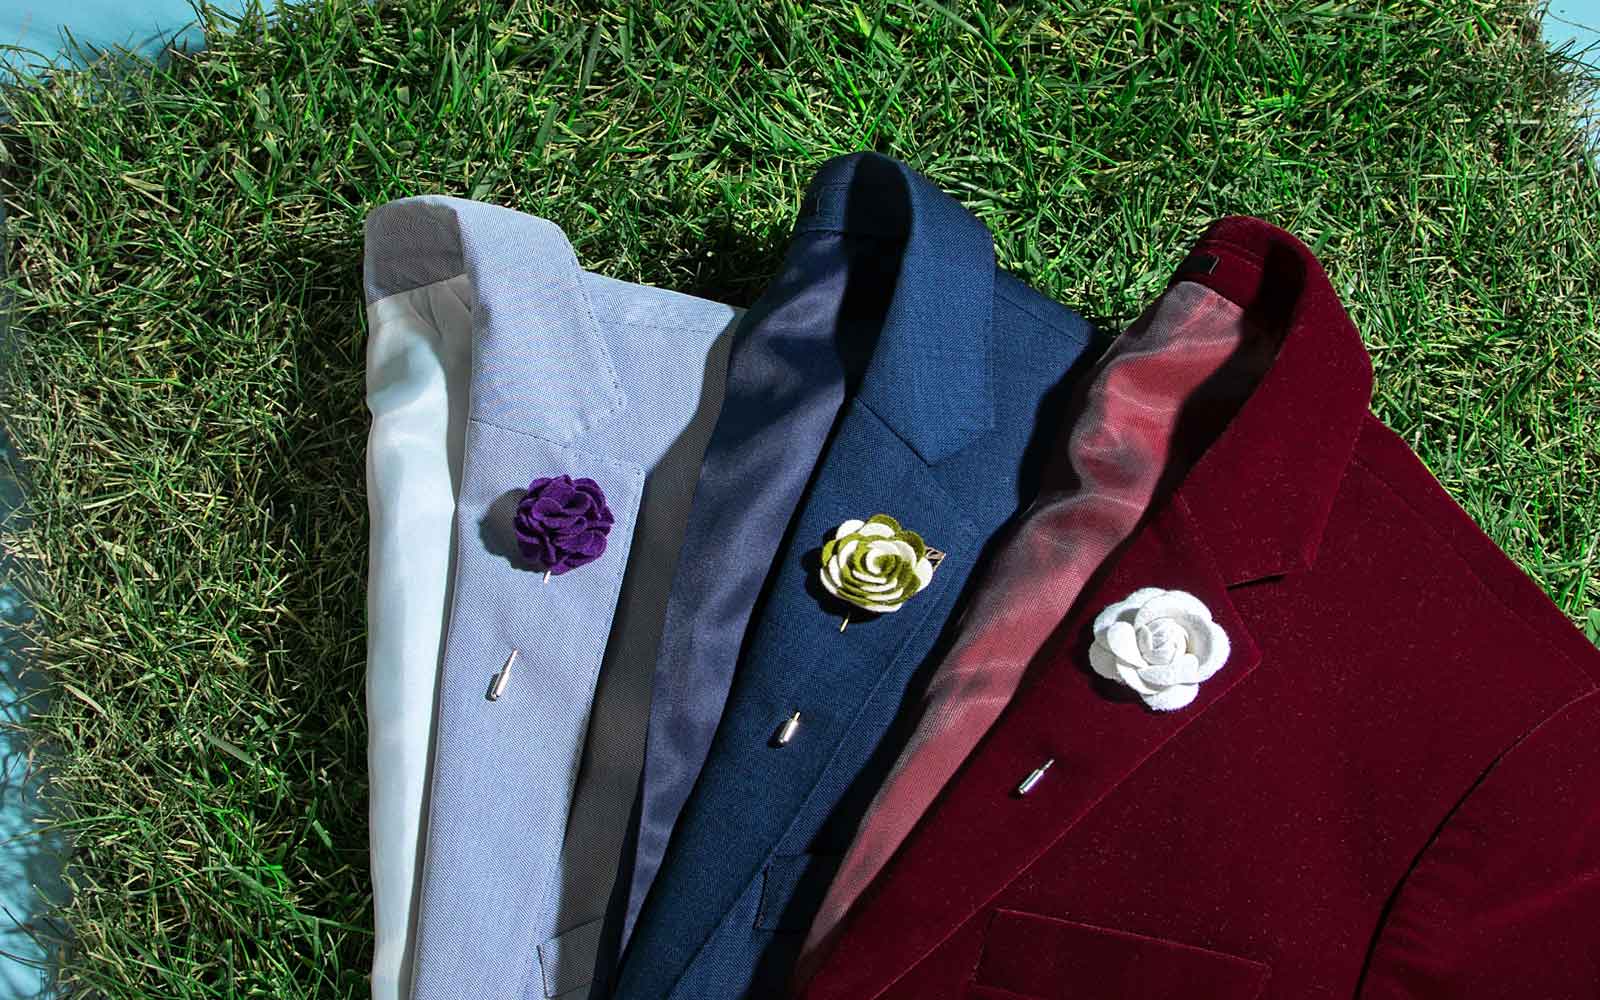 Collection of varying color blazers with Lapel Pins